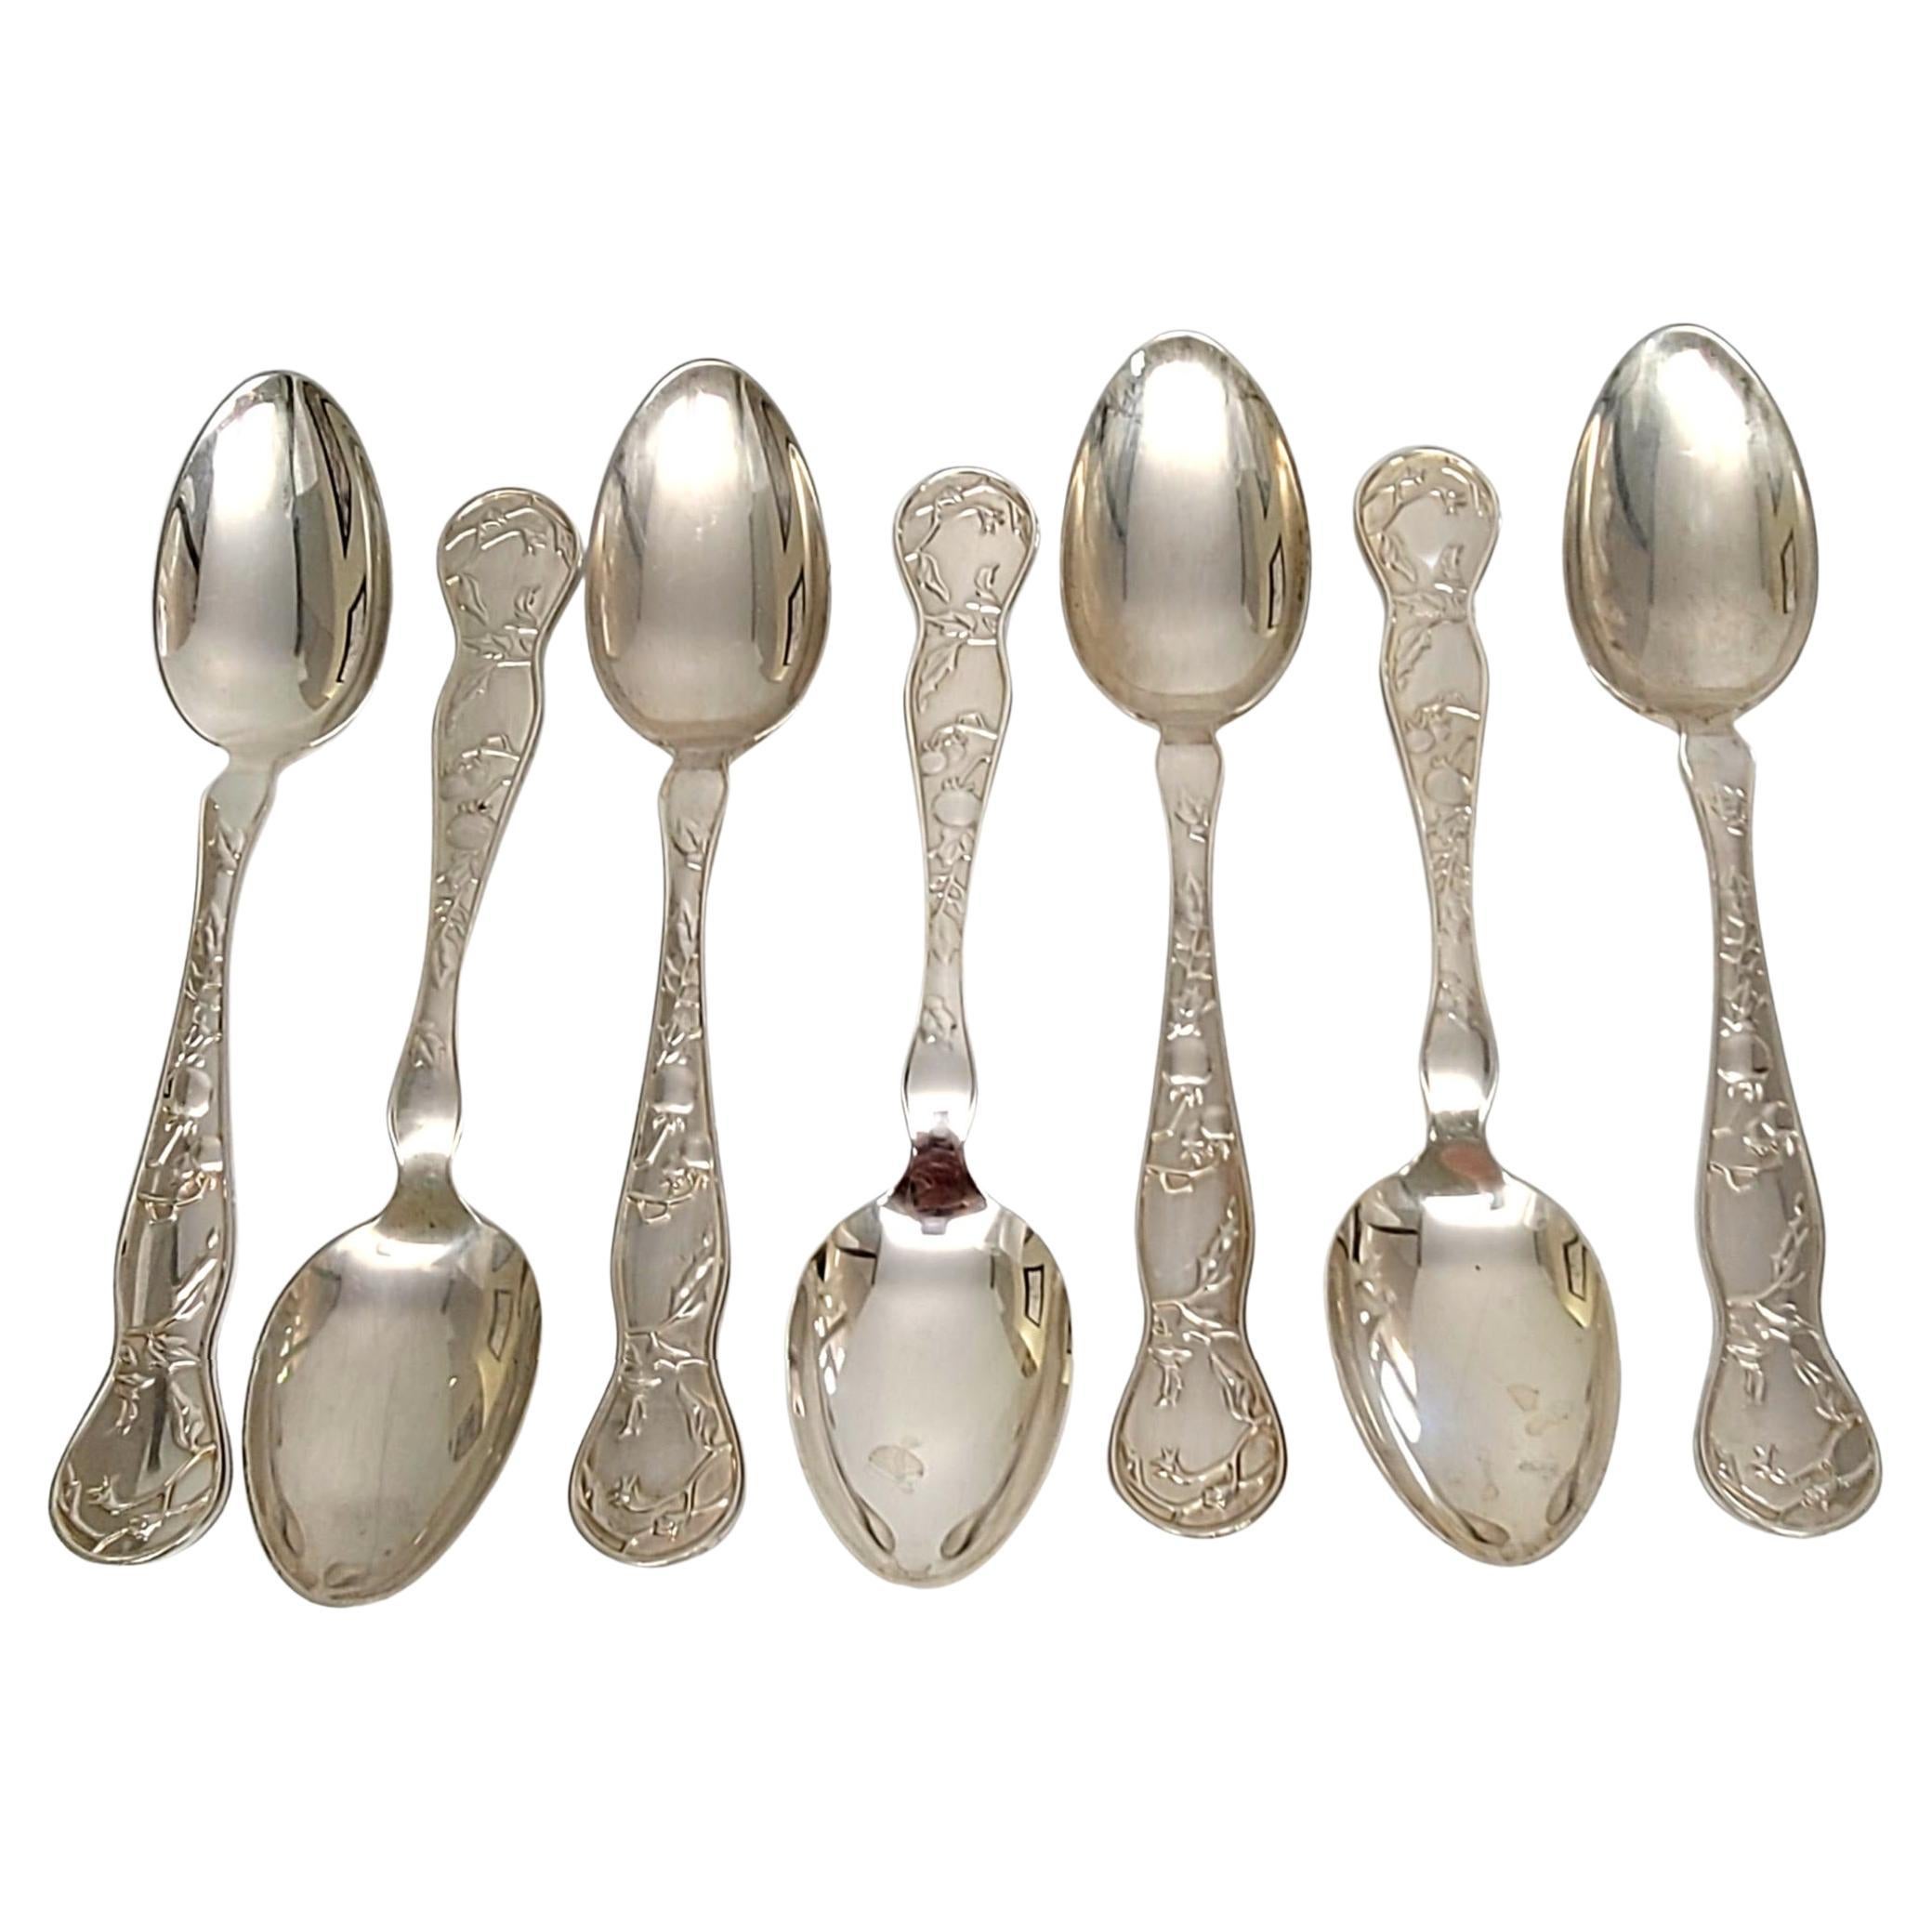 Set of 7 Tiffany & Co American Garden Sterling Silver Dessert/Oval Soup Spoons